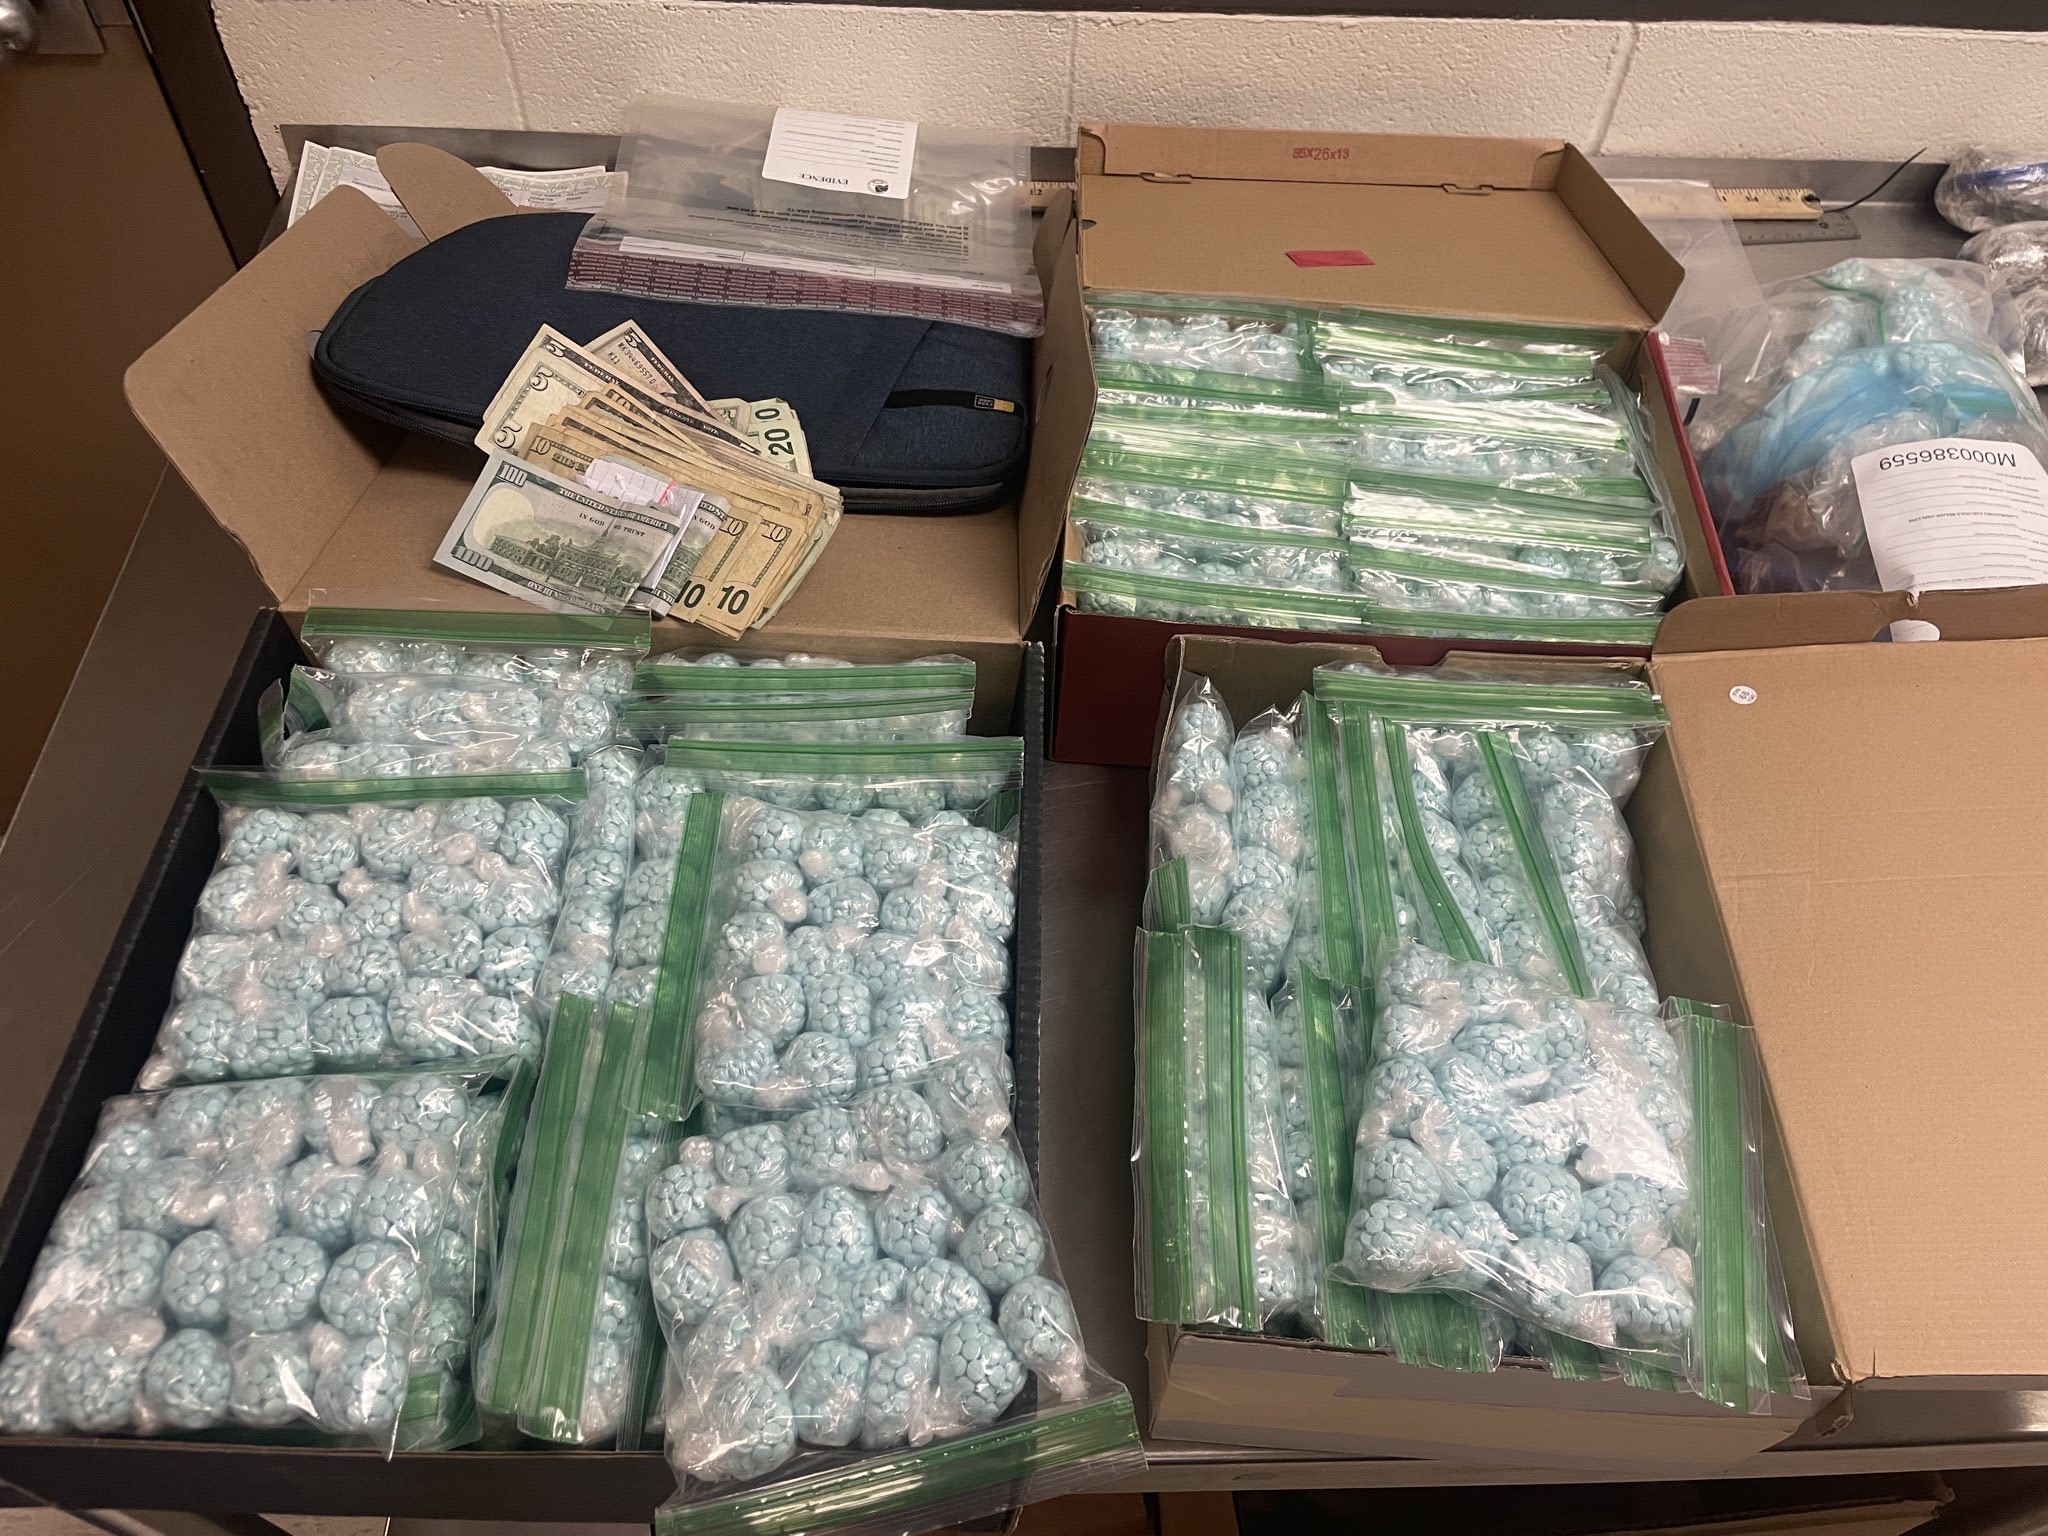 Colorado law enforcement seized a total of 200,000 fentanyl pills in two separate busts in April and February. (Courtesy of 18th Judicial District)